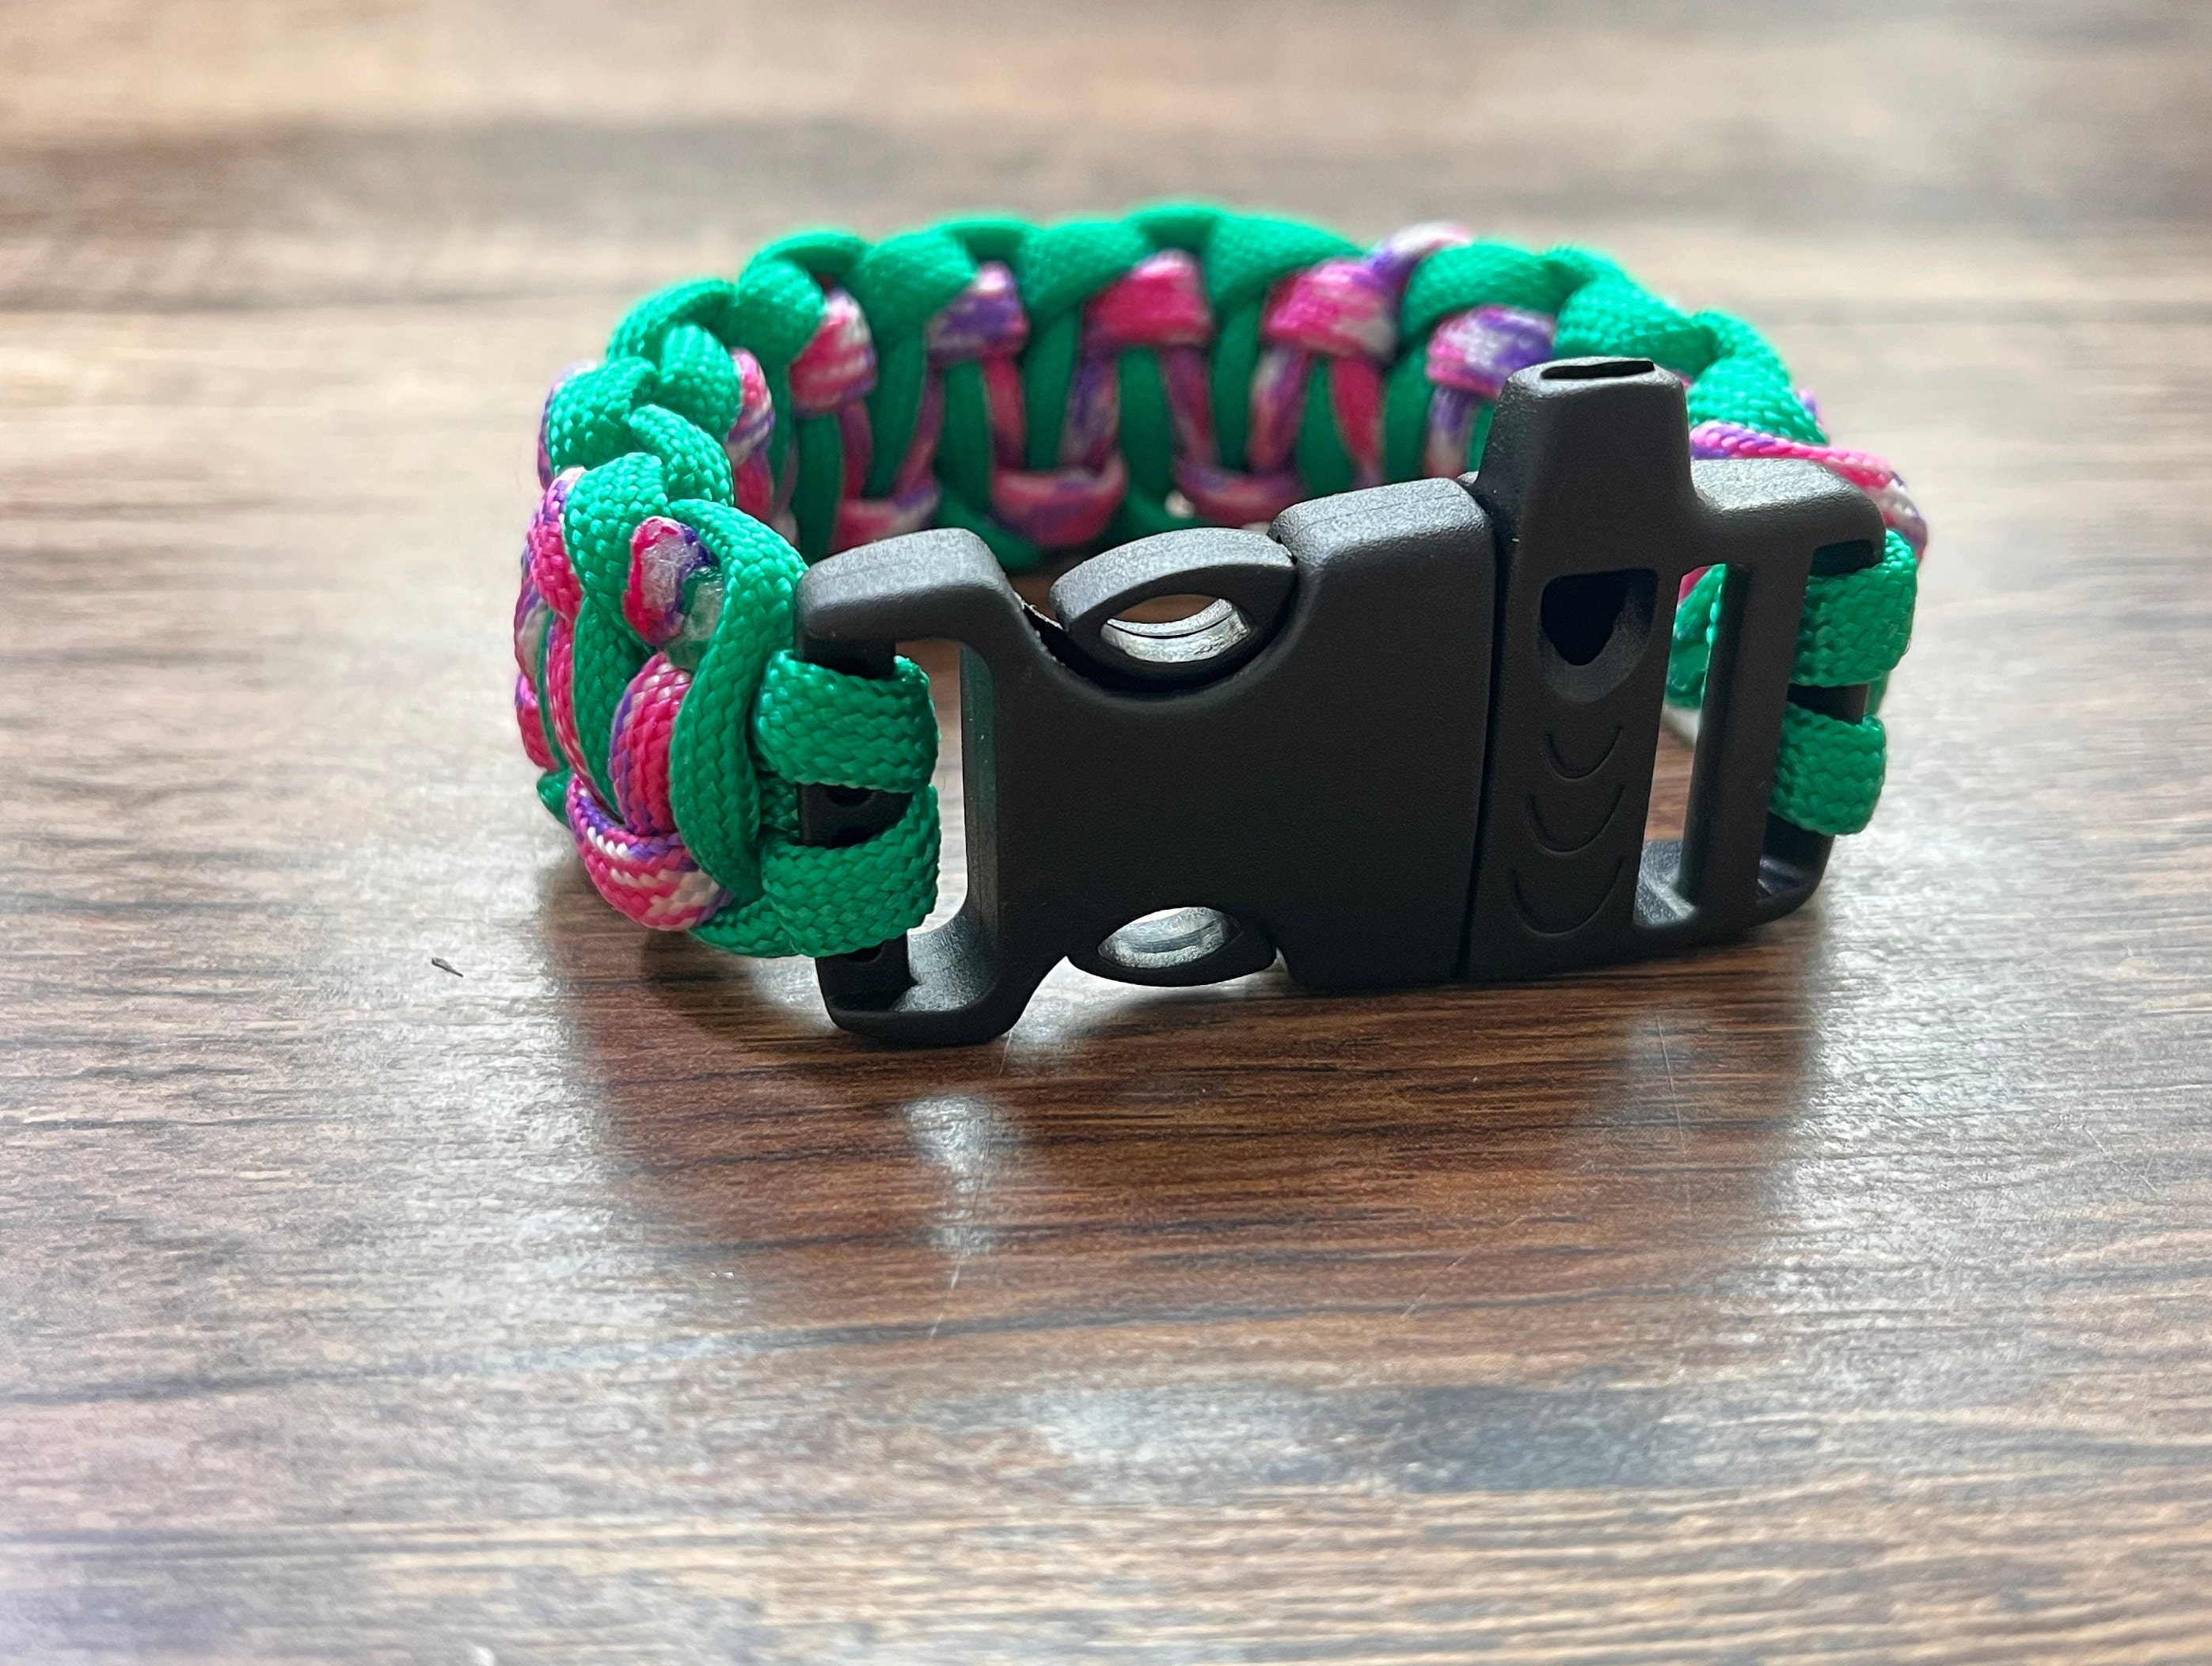 Green and Pink/purple Tie-dye Paracord Bracelet for Small or Medium Wrists  With Built in Whistle. 